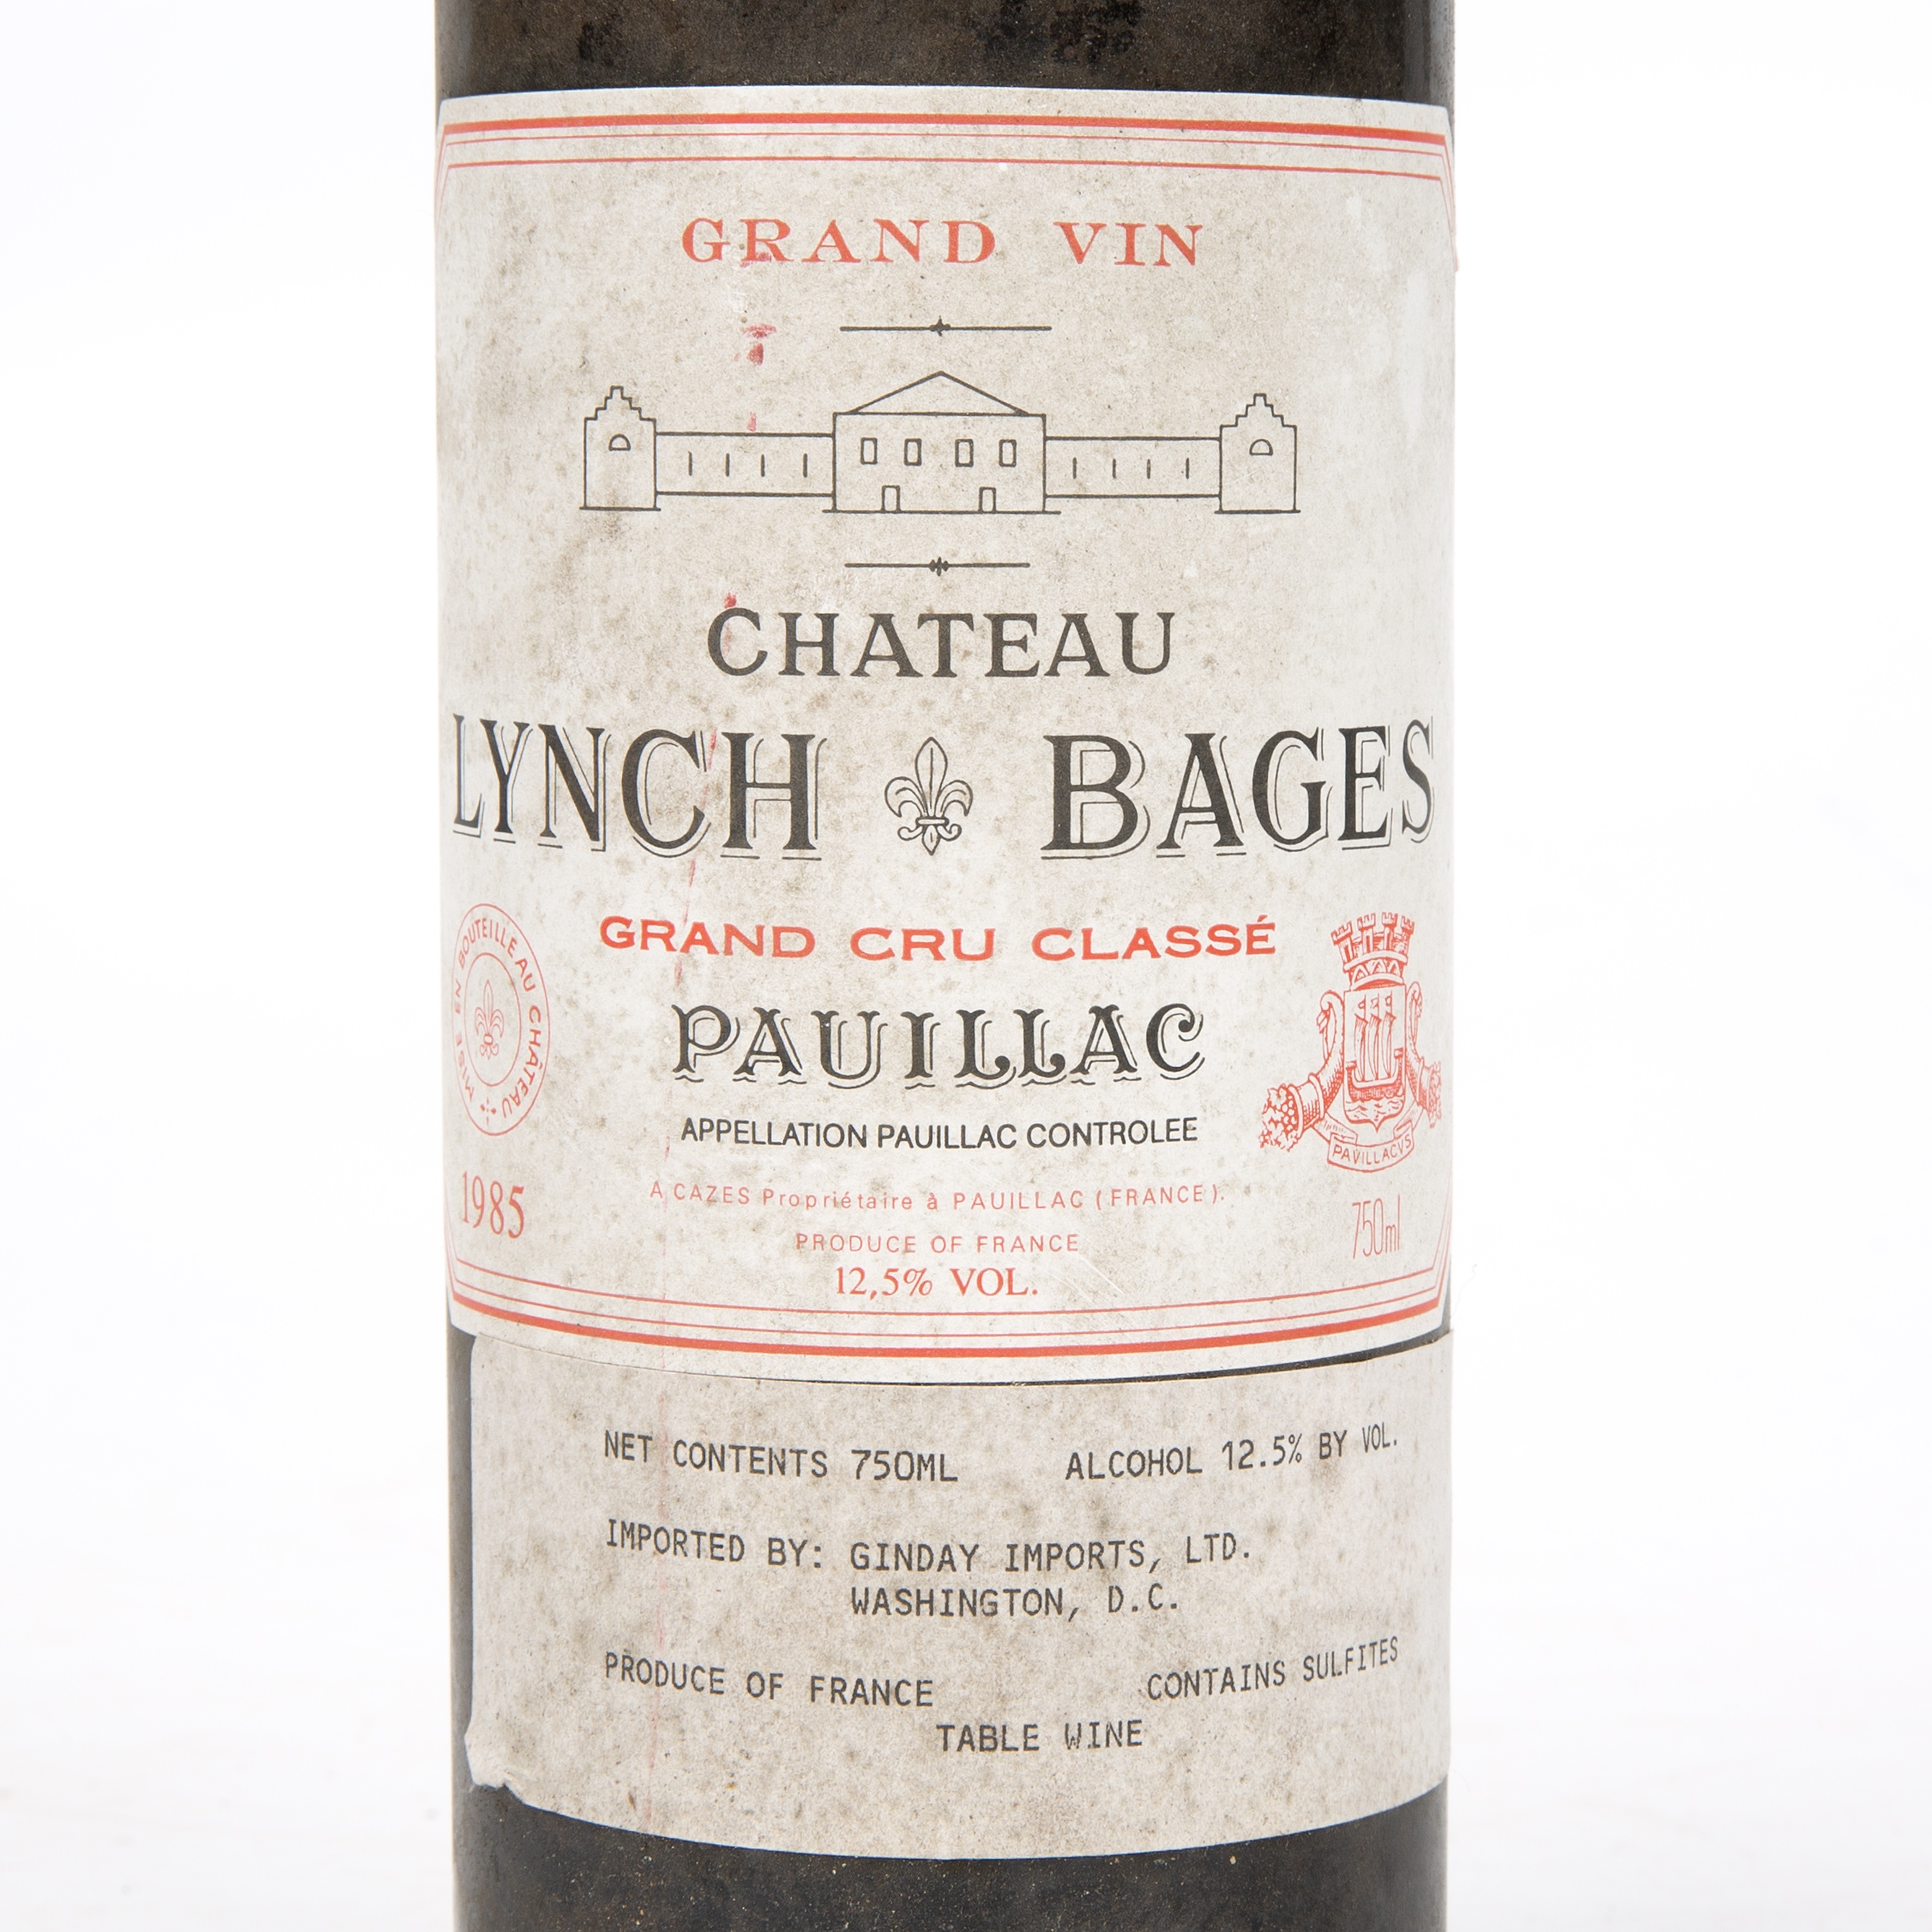 A bottle of 1985 Chateau Lynch-Bages, Pauillac, France - Image 2 of 2